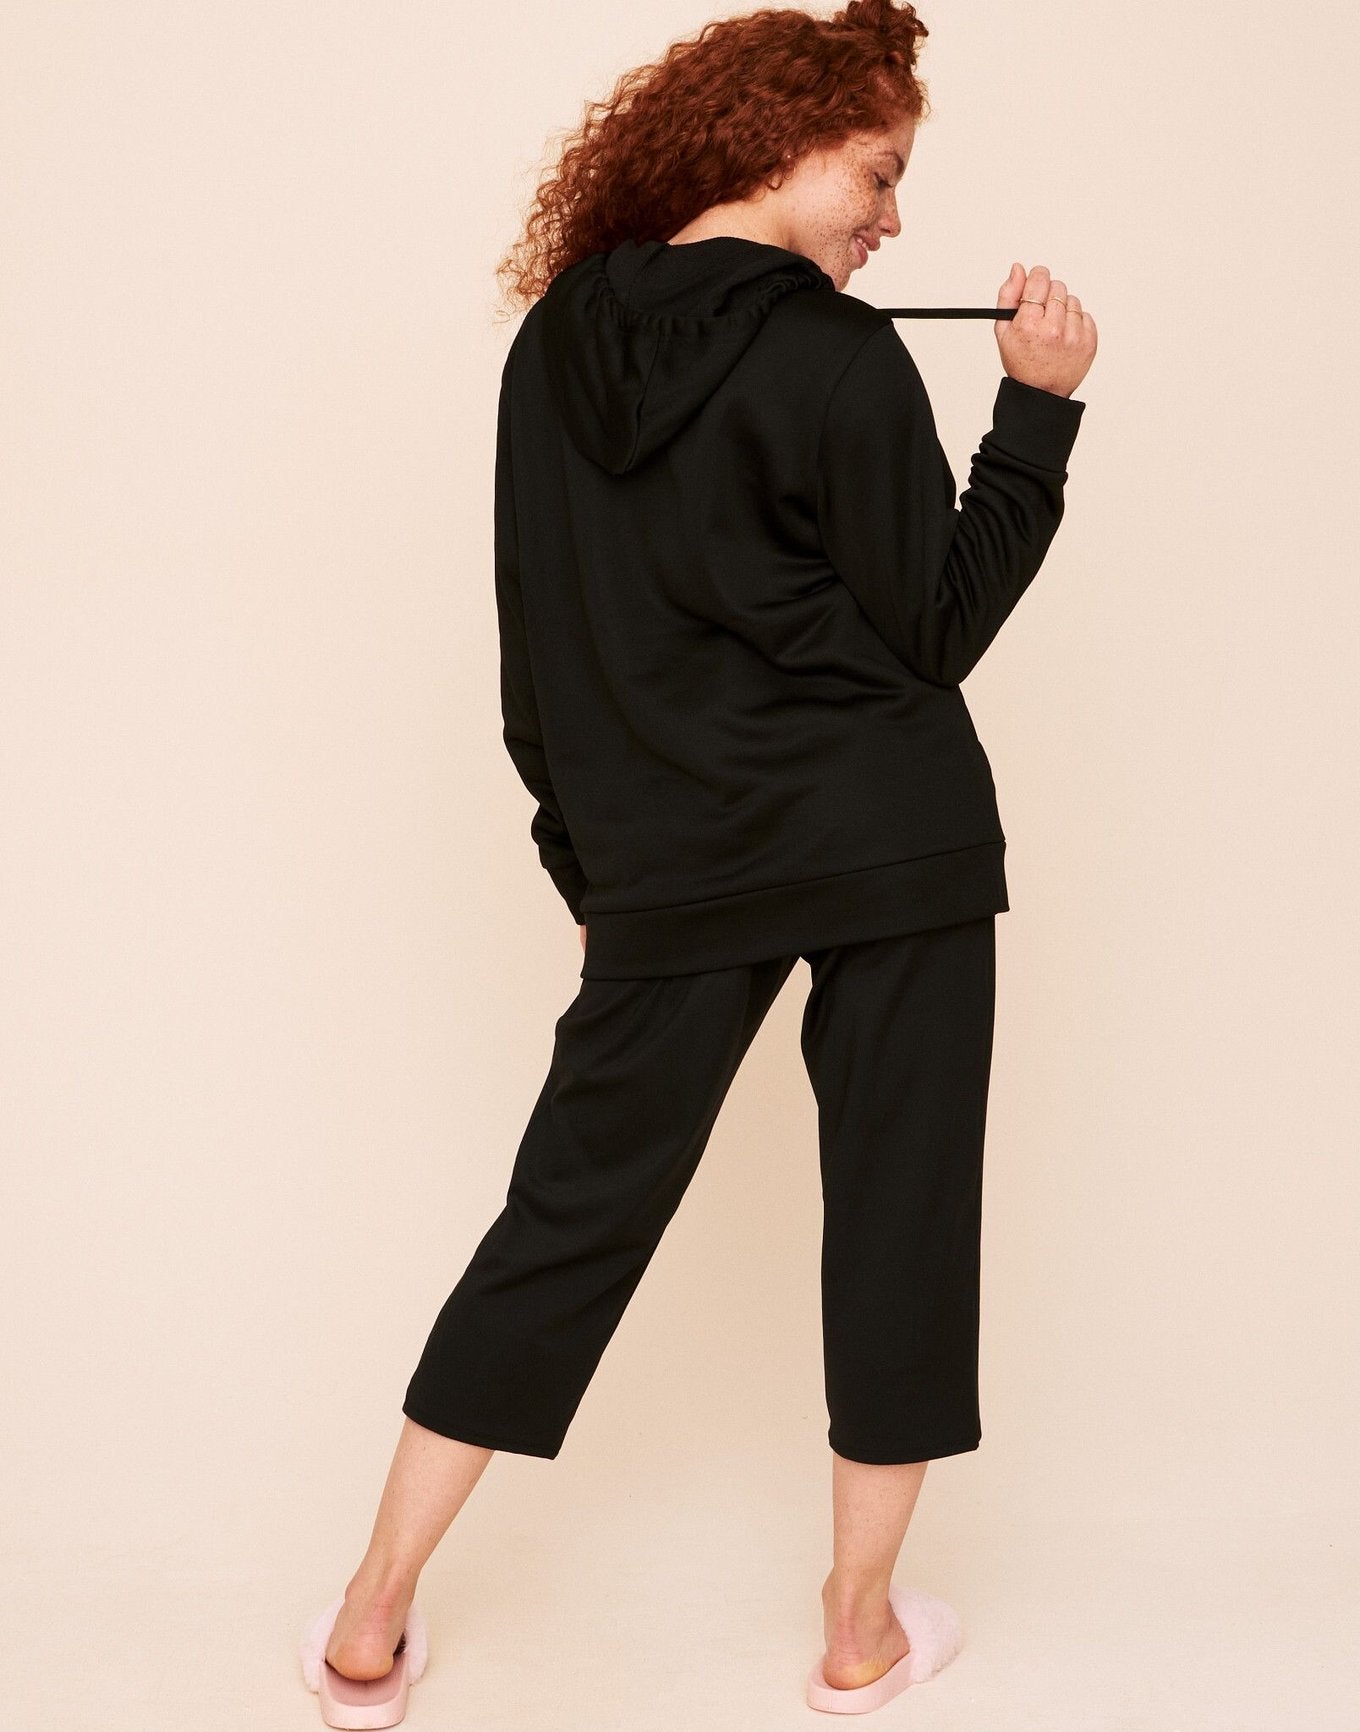 Earth Republic Jaelyn Cropped Pant Cropped Pant in color Jet Black and shape pant